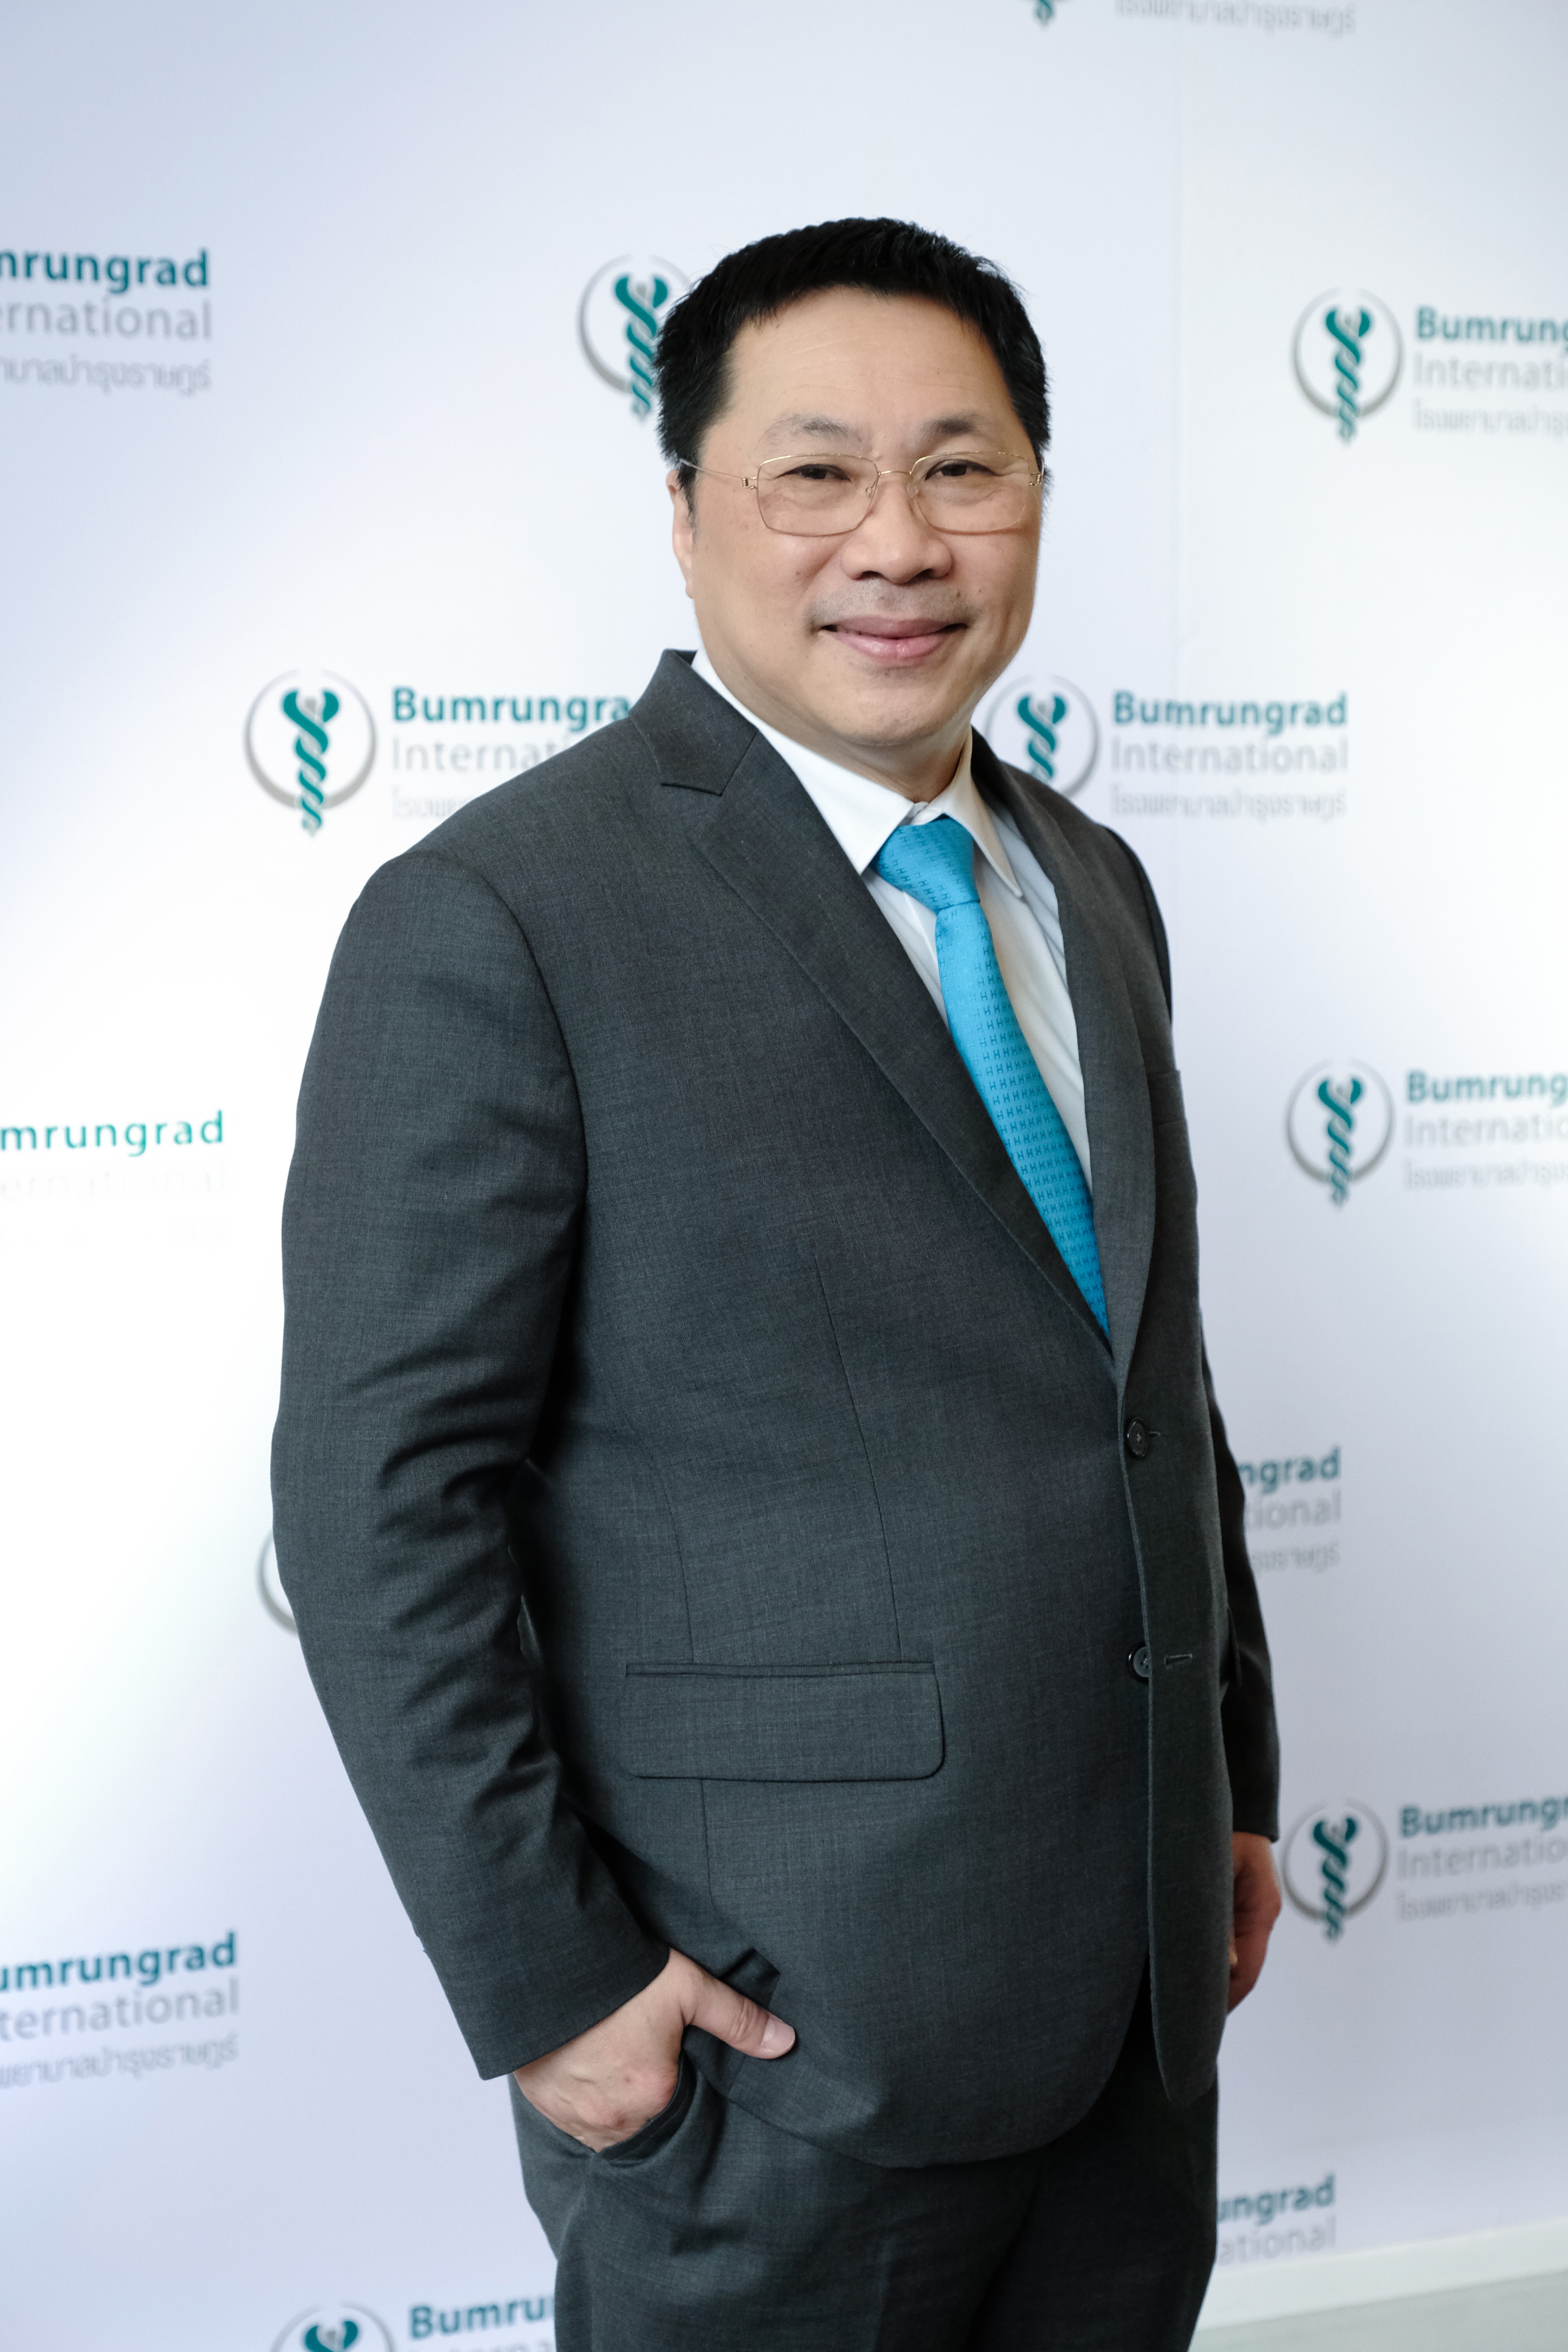 Dr Somsak Chaovisitsaree, CEO and medical director